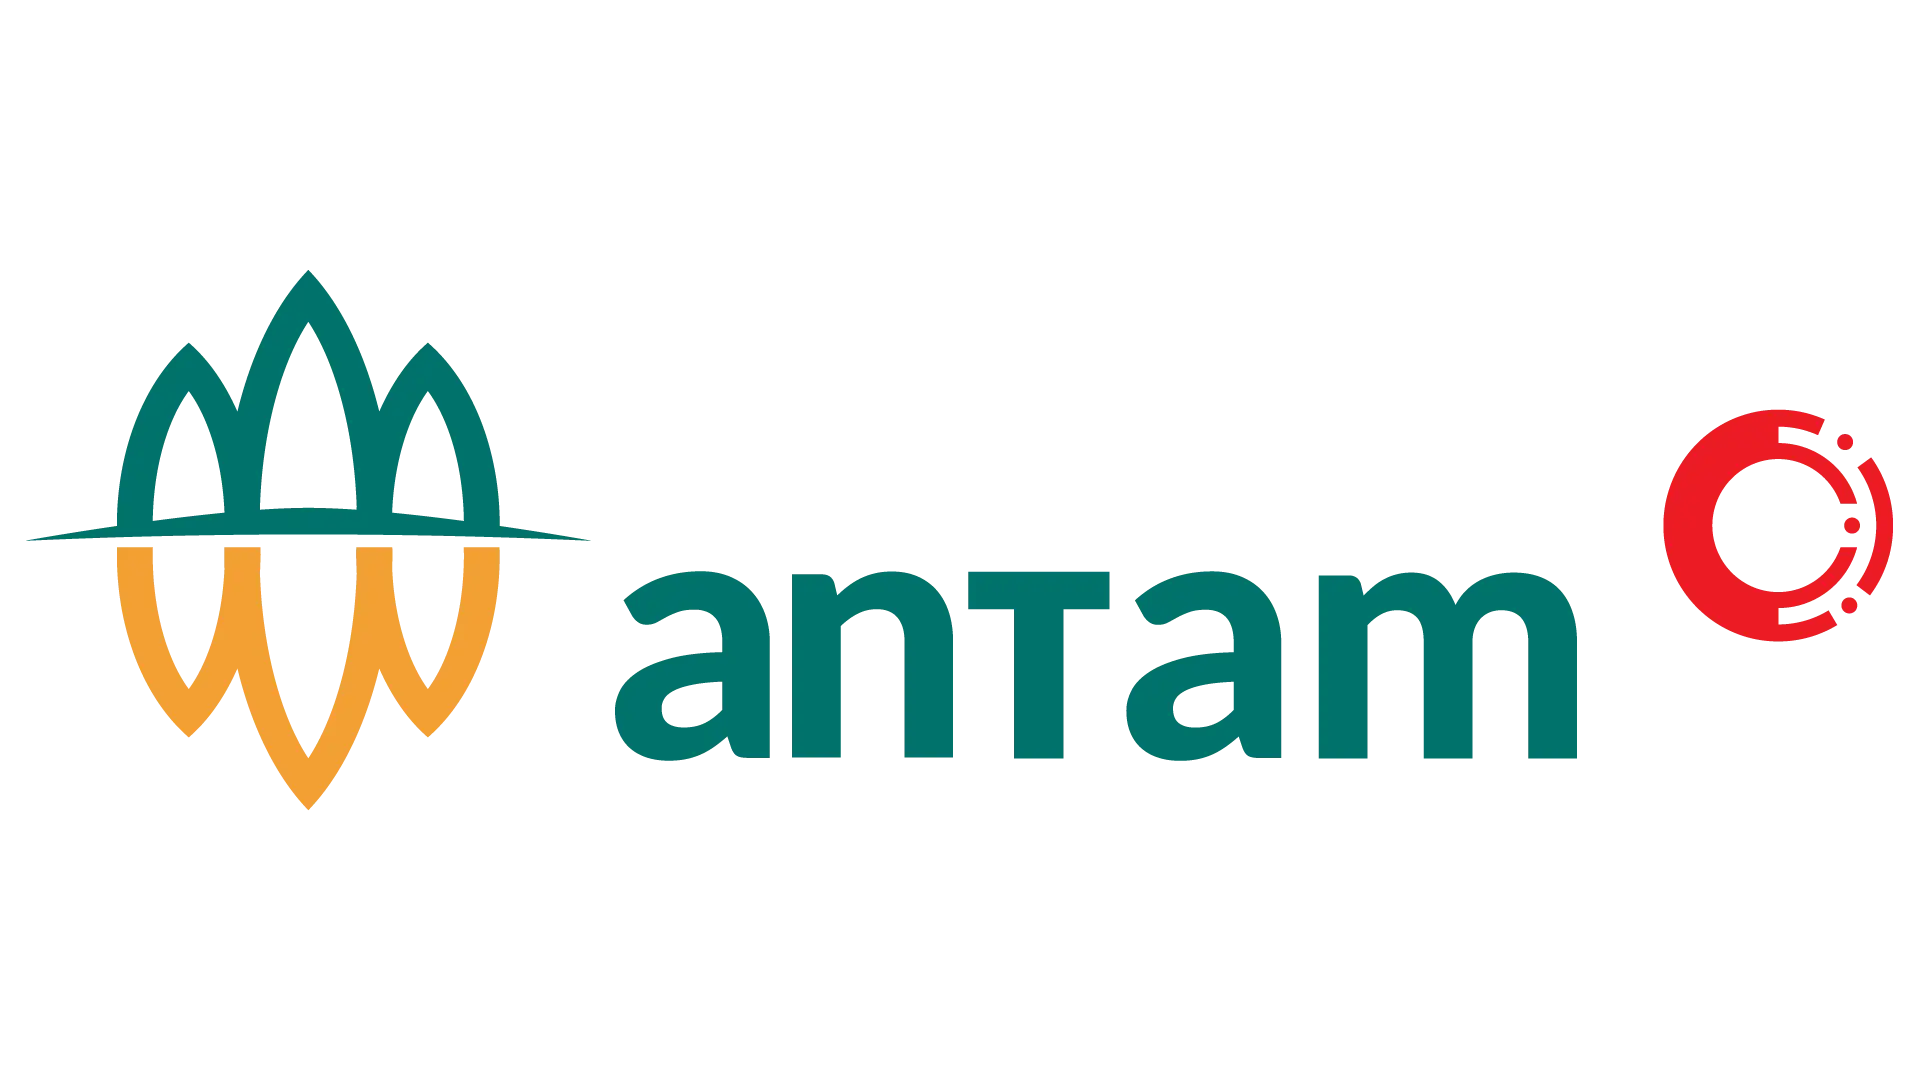 Chatbot manager in the mining industry owned by Antam company